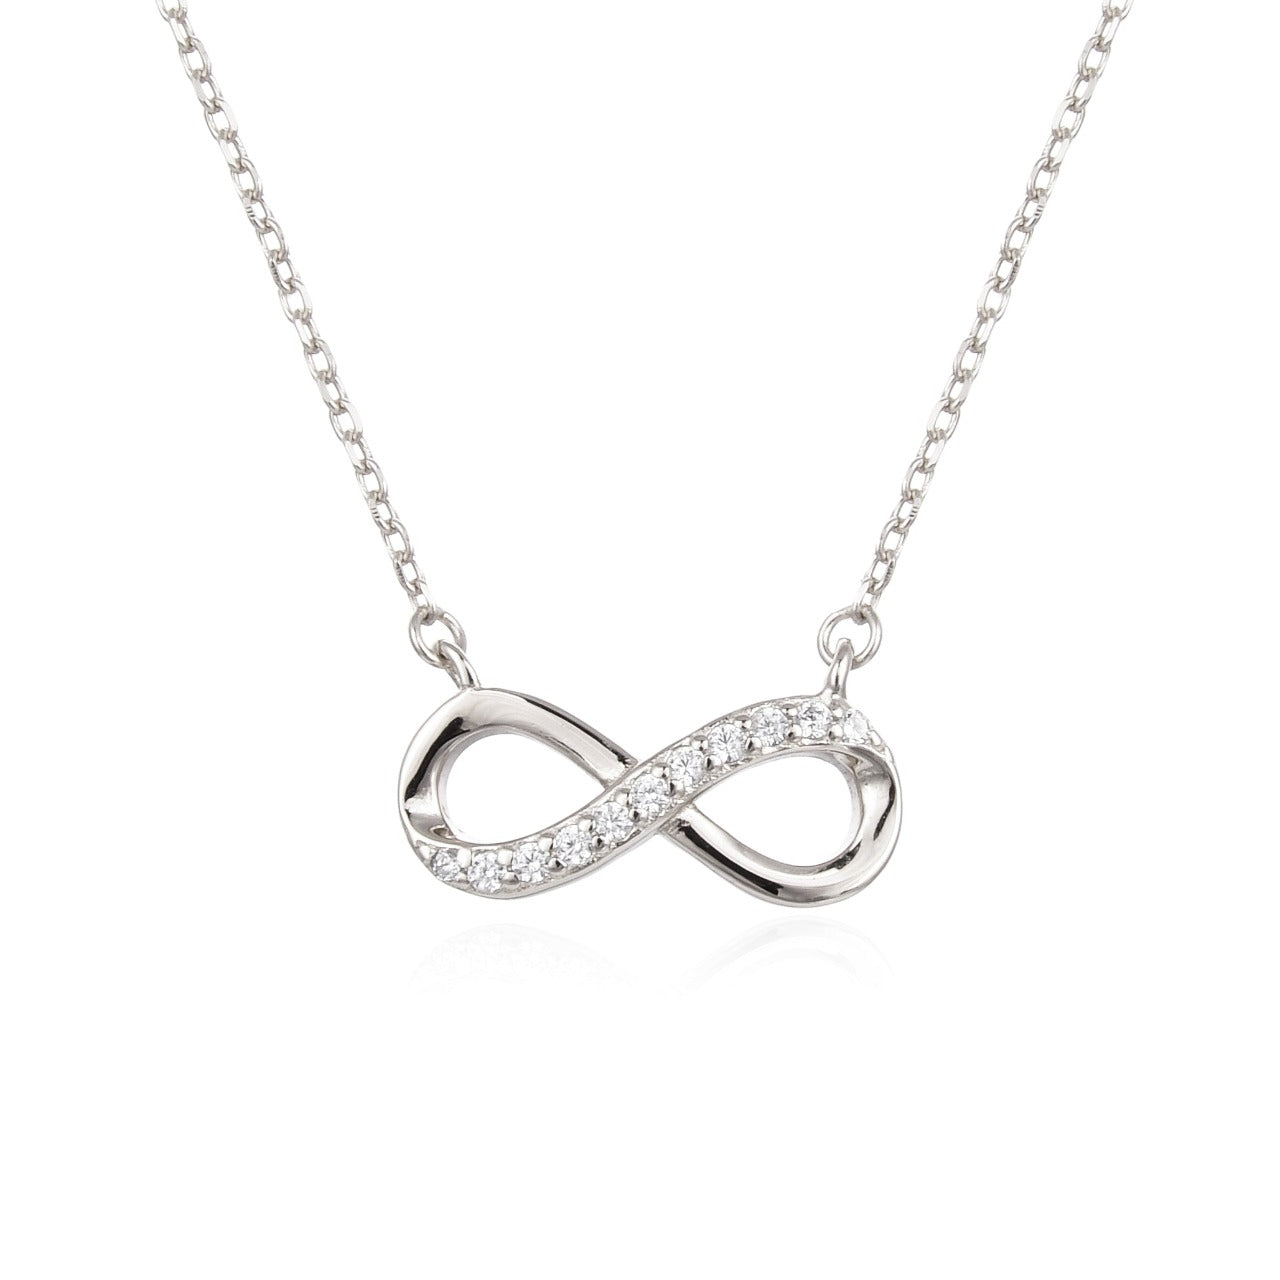 Silver Infinity Necklace by Kilkenny Silver  Sterling silver infinity love necklace with cubic zirconia stones.